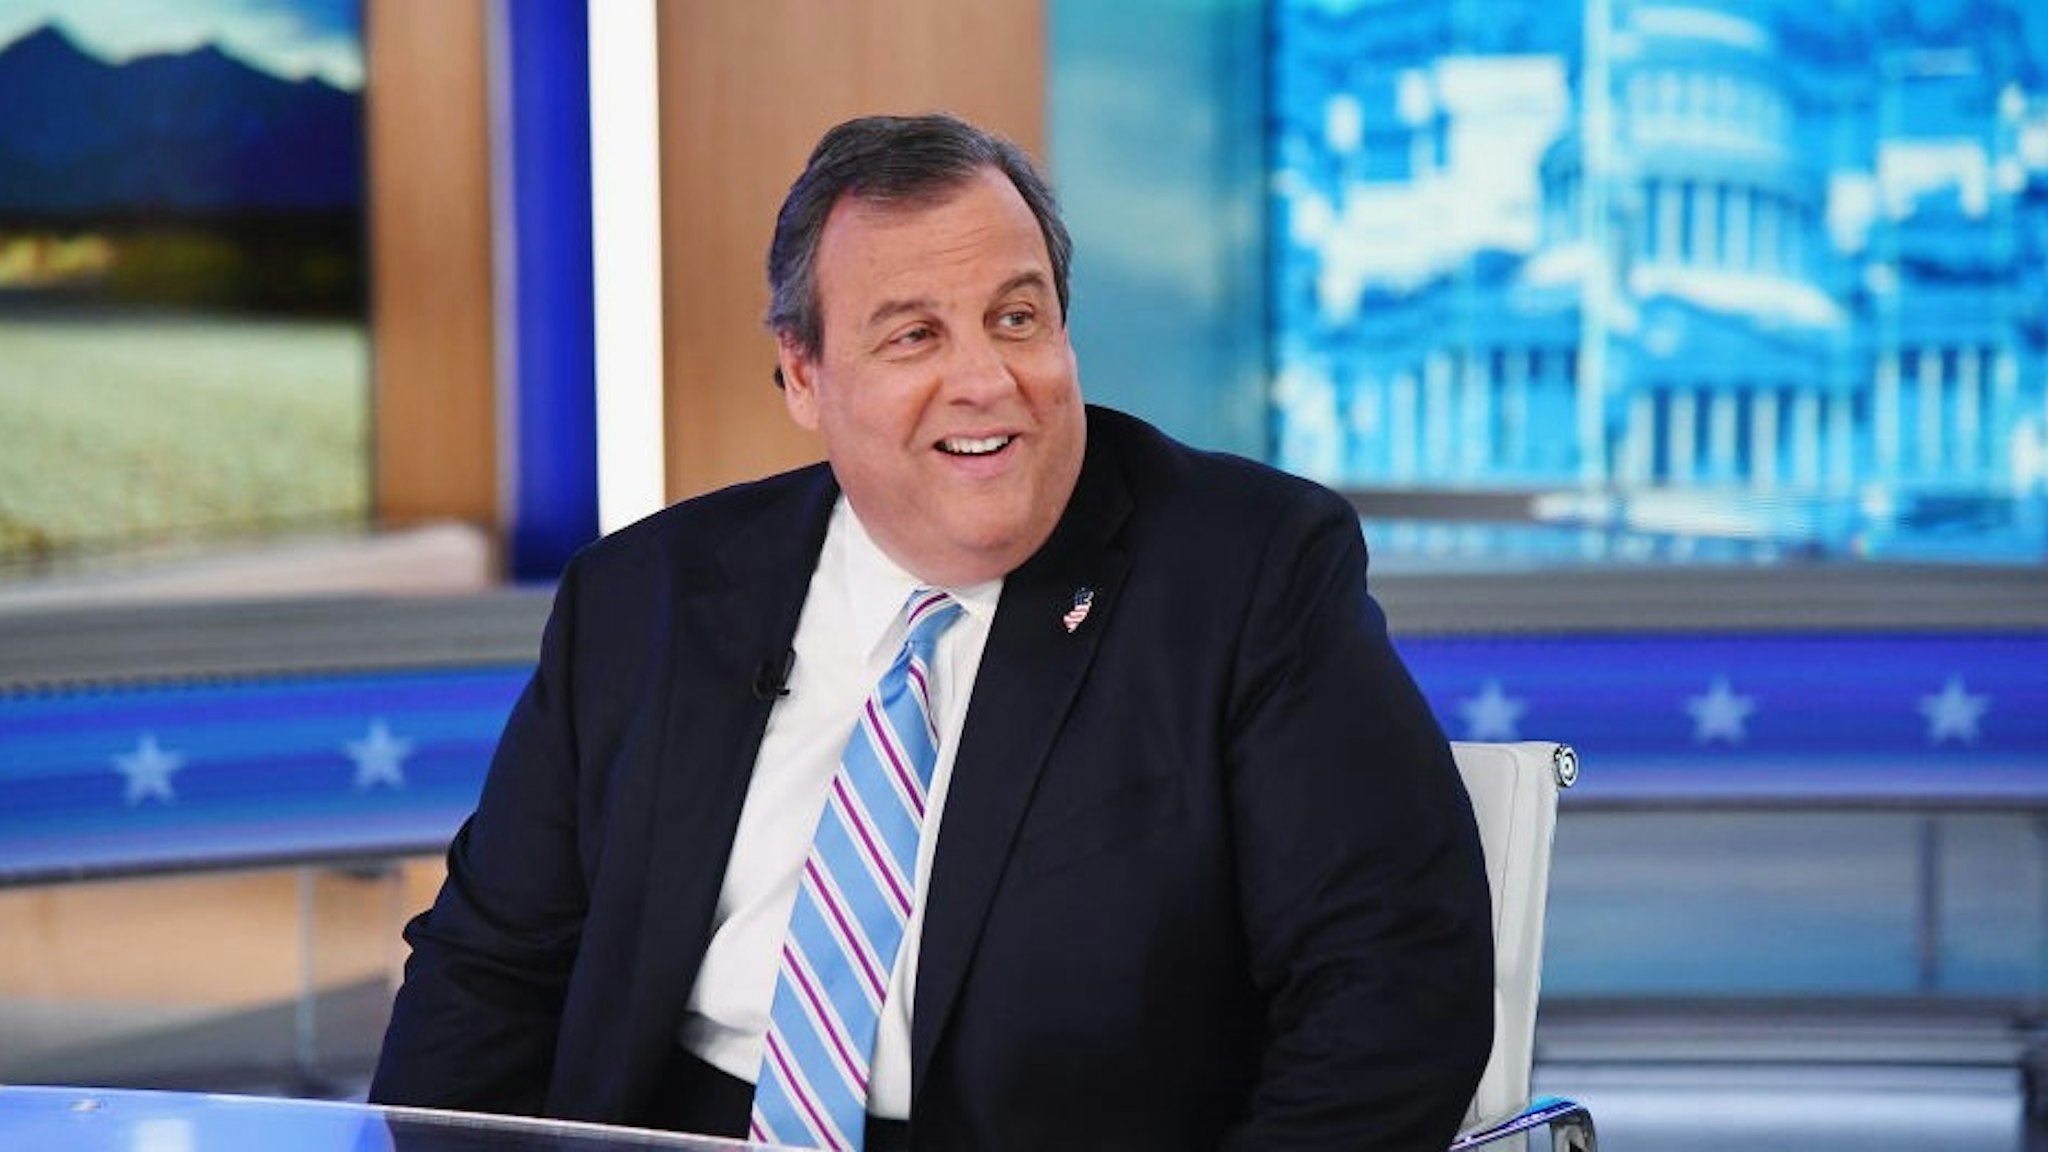 NEW YORK, NEW YORK - JANUARY 30: Former Governor Of New Jersey Chris Christie visits "The Daily Briefing With Dana Perino" at Fox News Channel Studios on January 30, 2019 in New York City. (Photo by